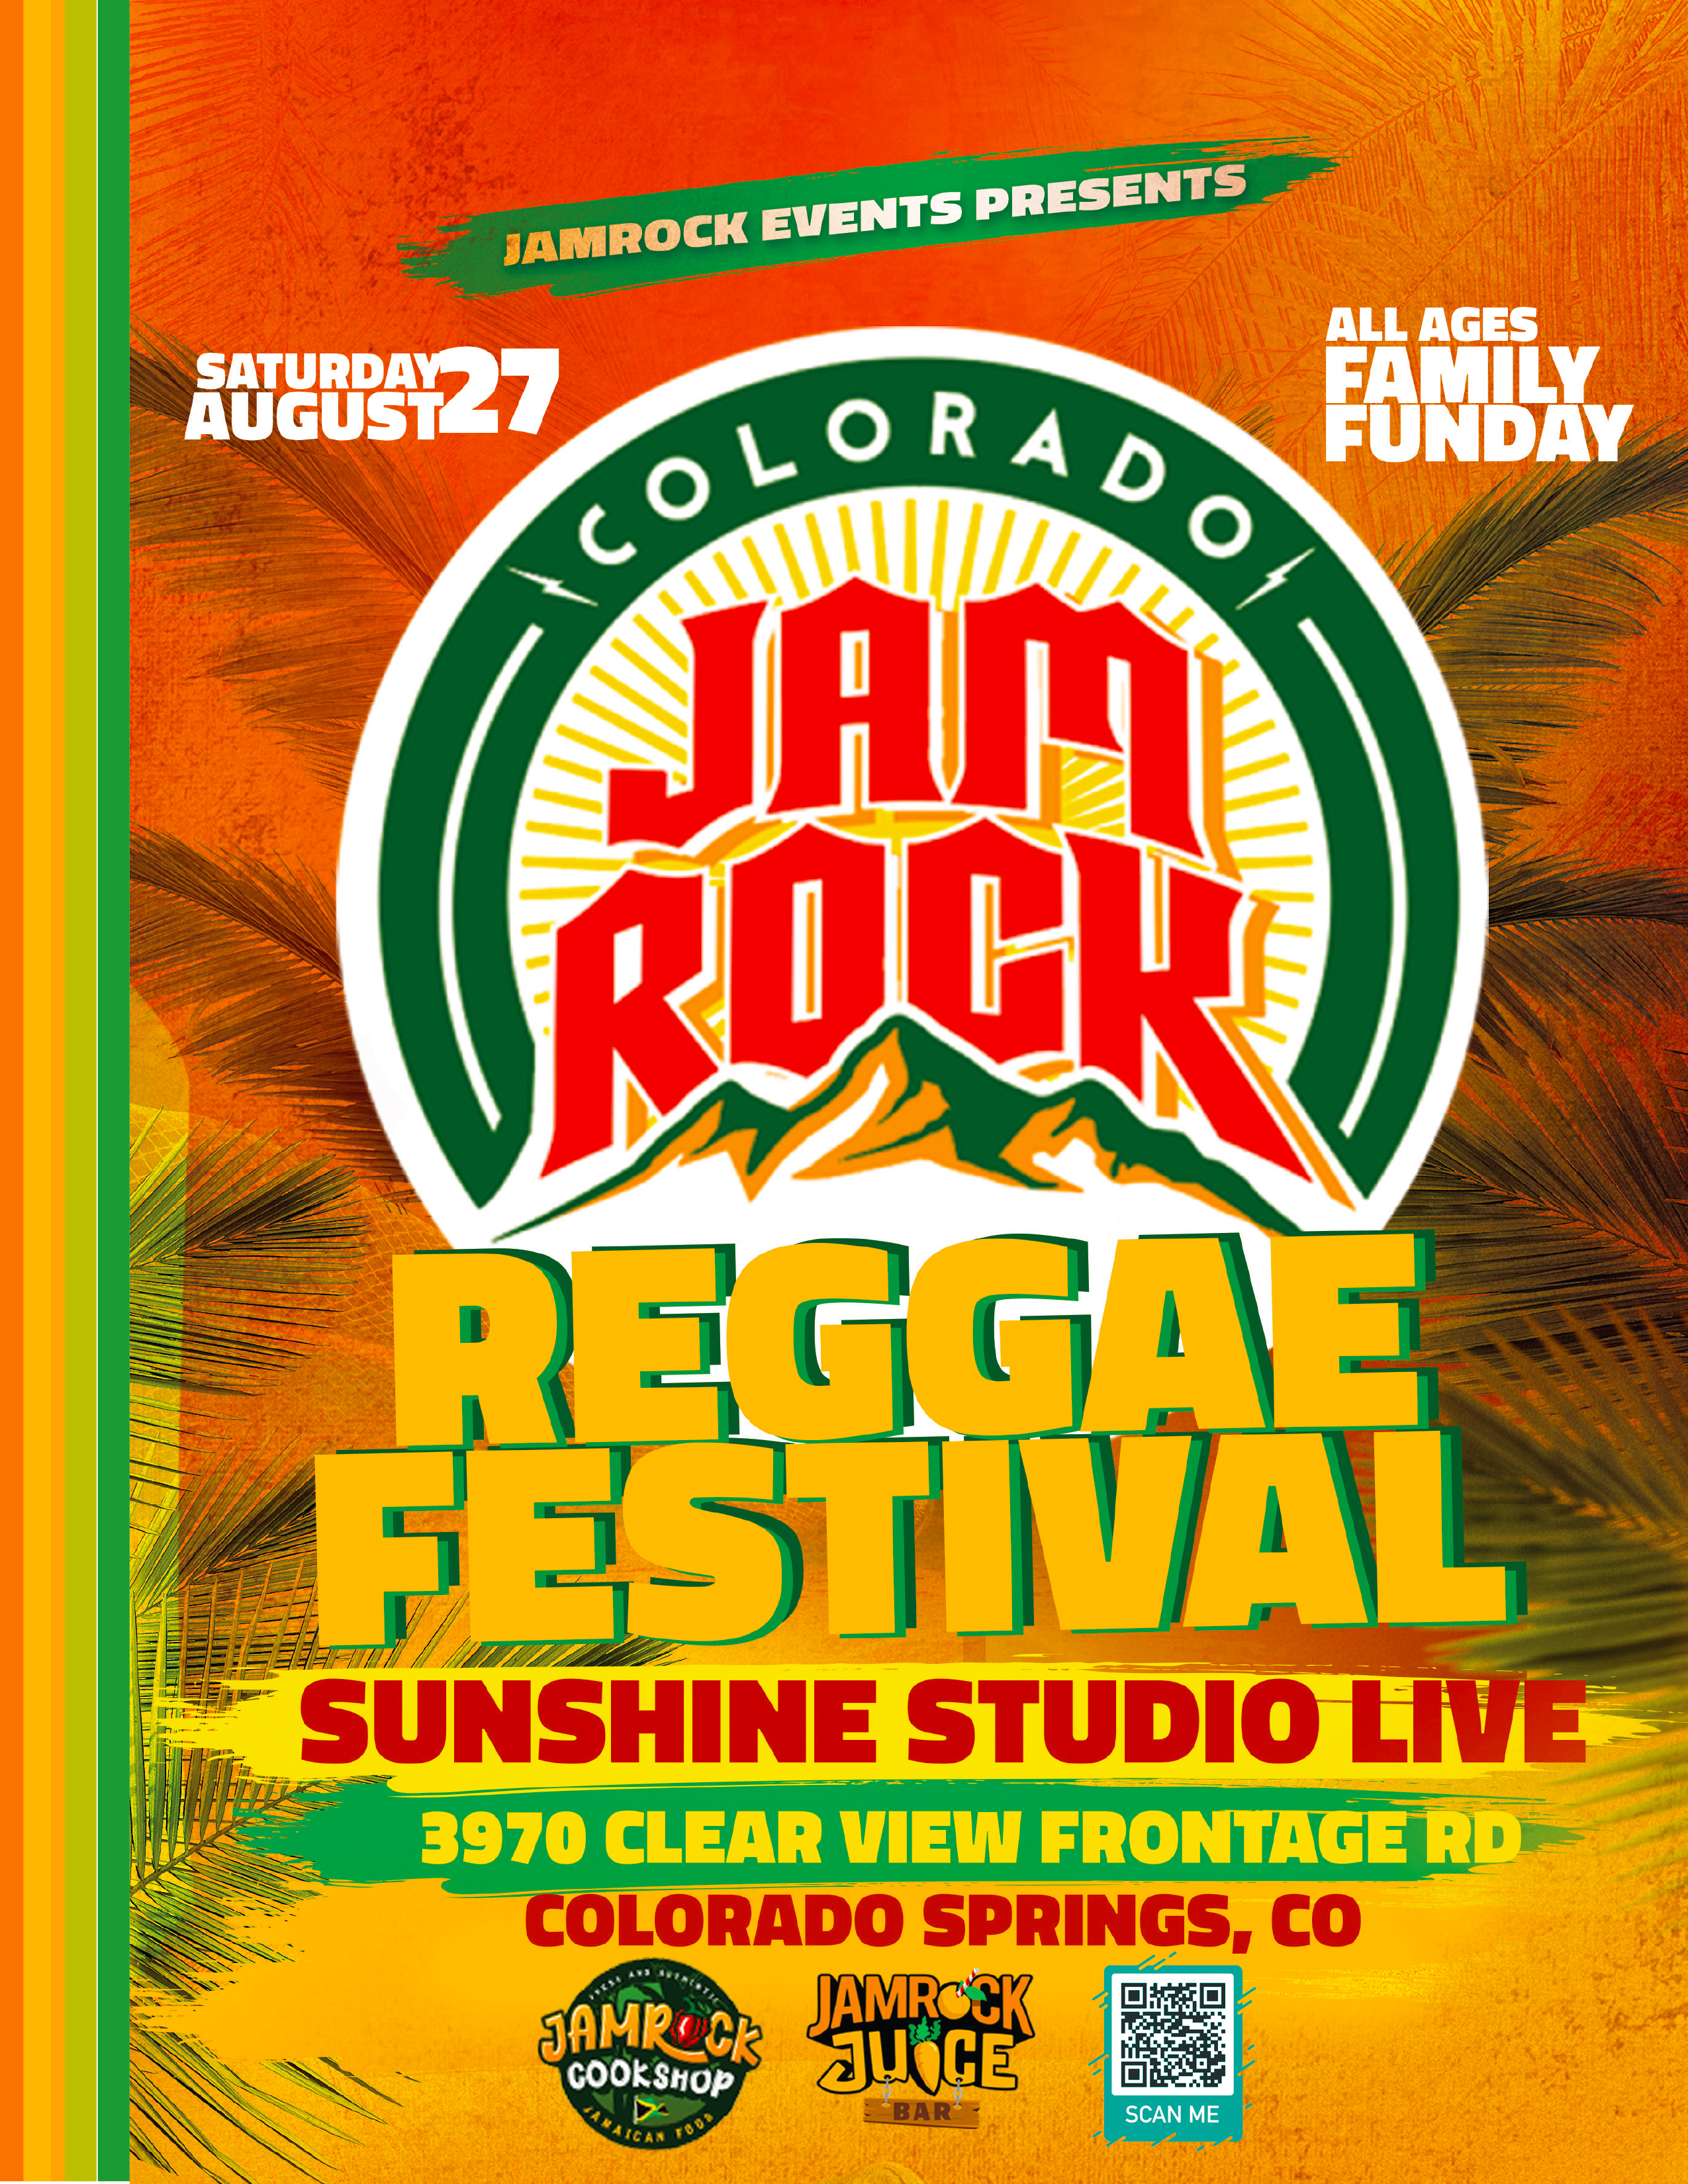 Buy Tickets to Jamrock Fest in Colorado Springs on Aug 27, 2022